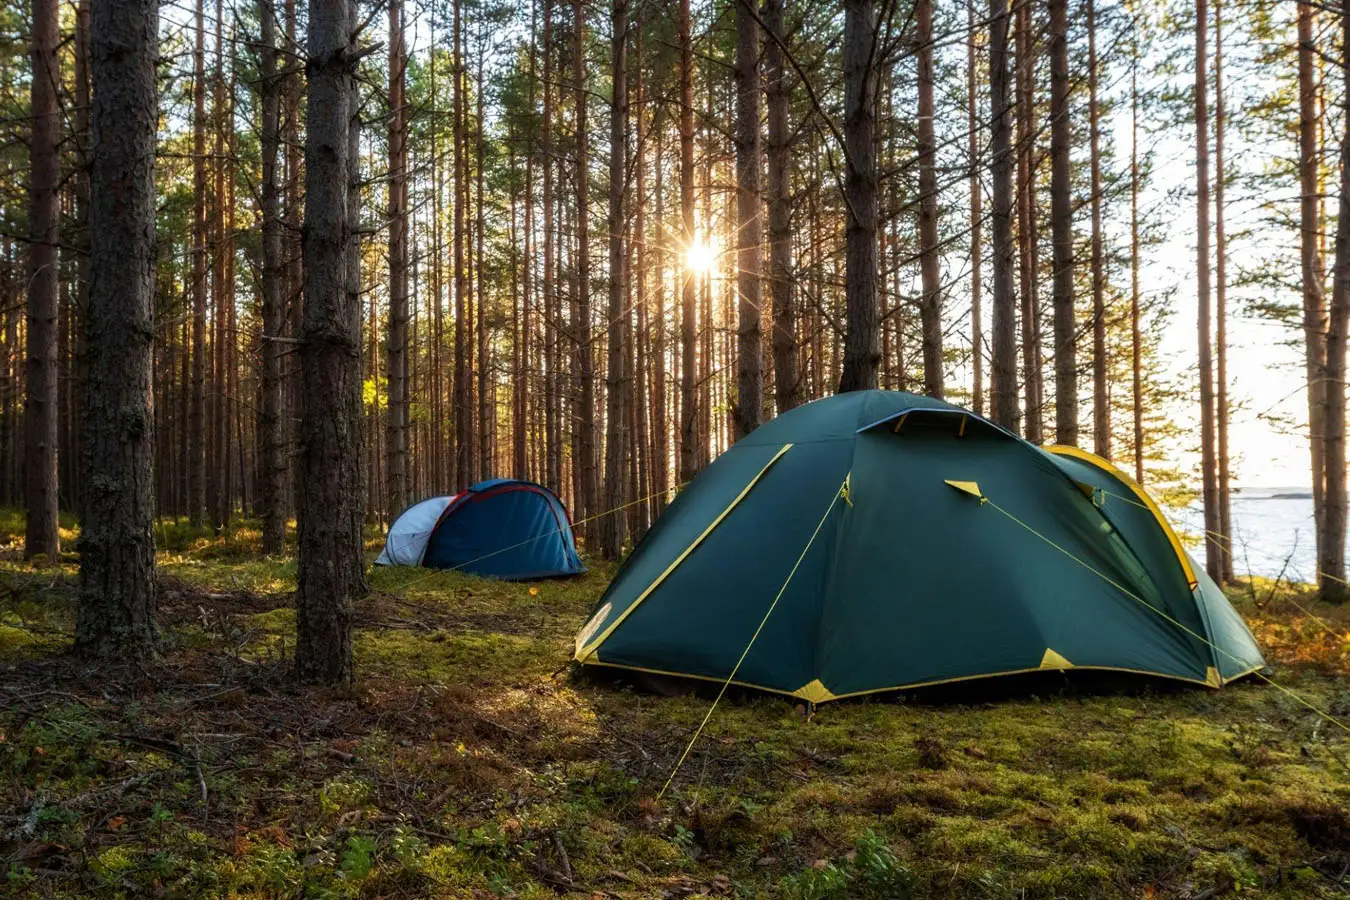 Is Tent Camping Safe? What You Need to Know